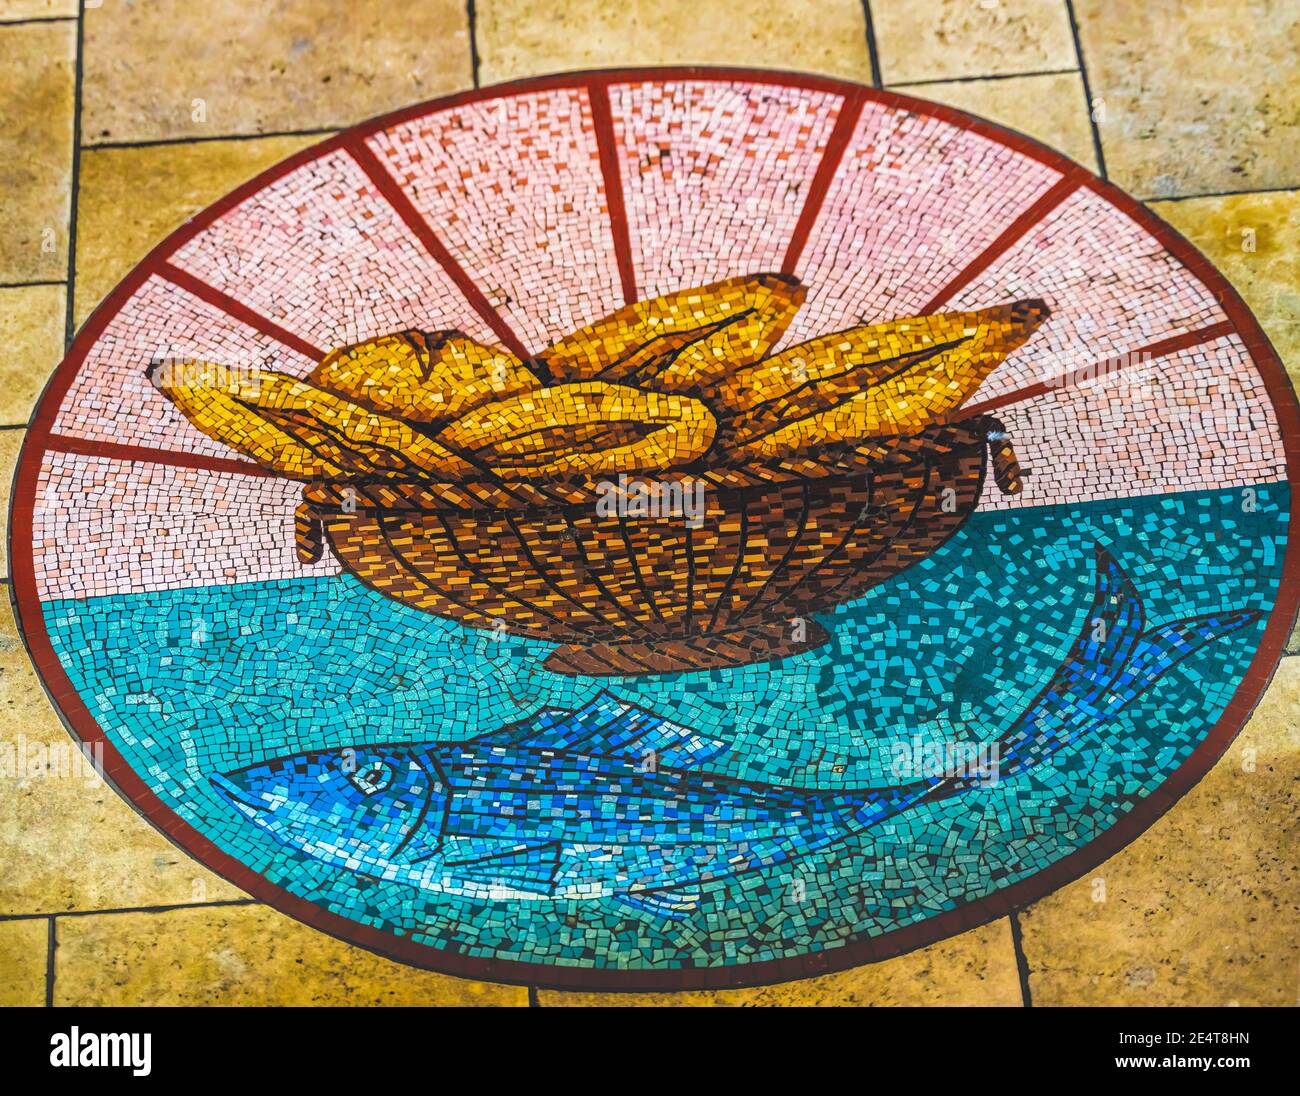 Colorful Bread Fish Mosaic Basilica Notre Dame Cathedral Papaeete Tahiti French Polynesia. Reference to Jesus feeding the multitudes Stock Photo